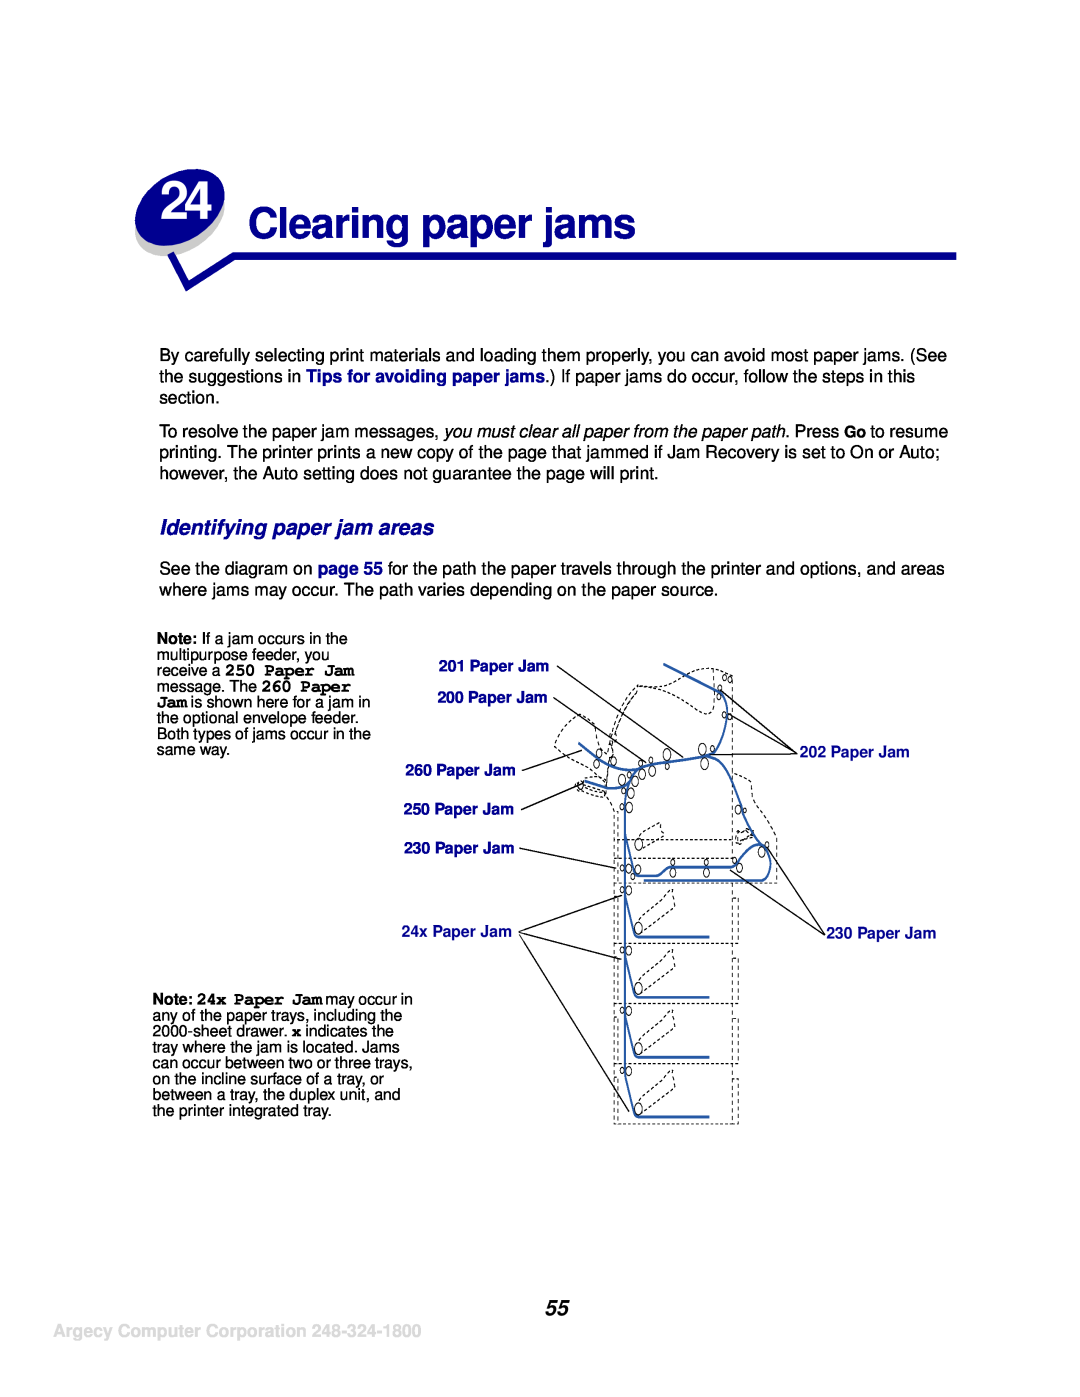 IBM 1120, 1125 manual Clearing paper jams, Identifying paper jam areas, Argecy Computer Corporation 